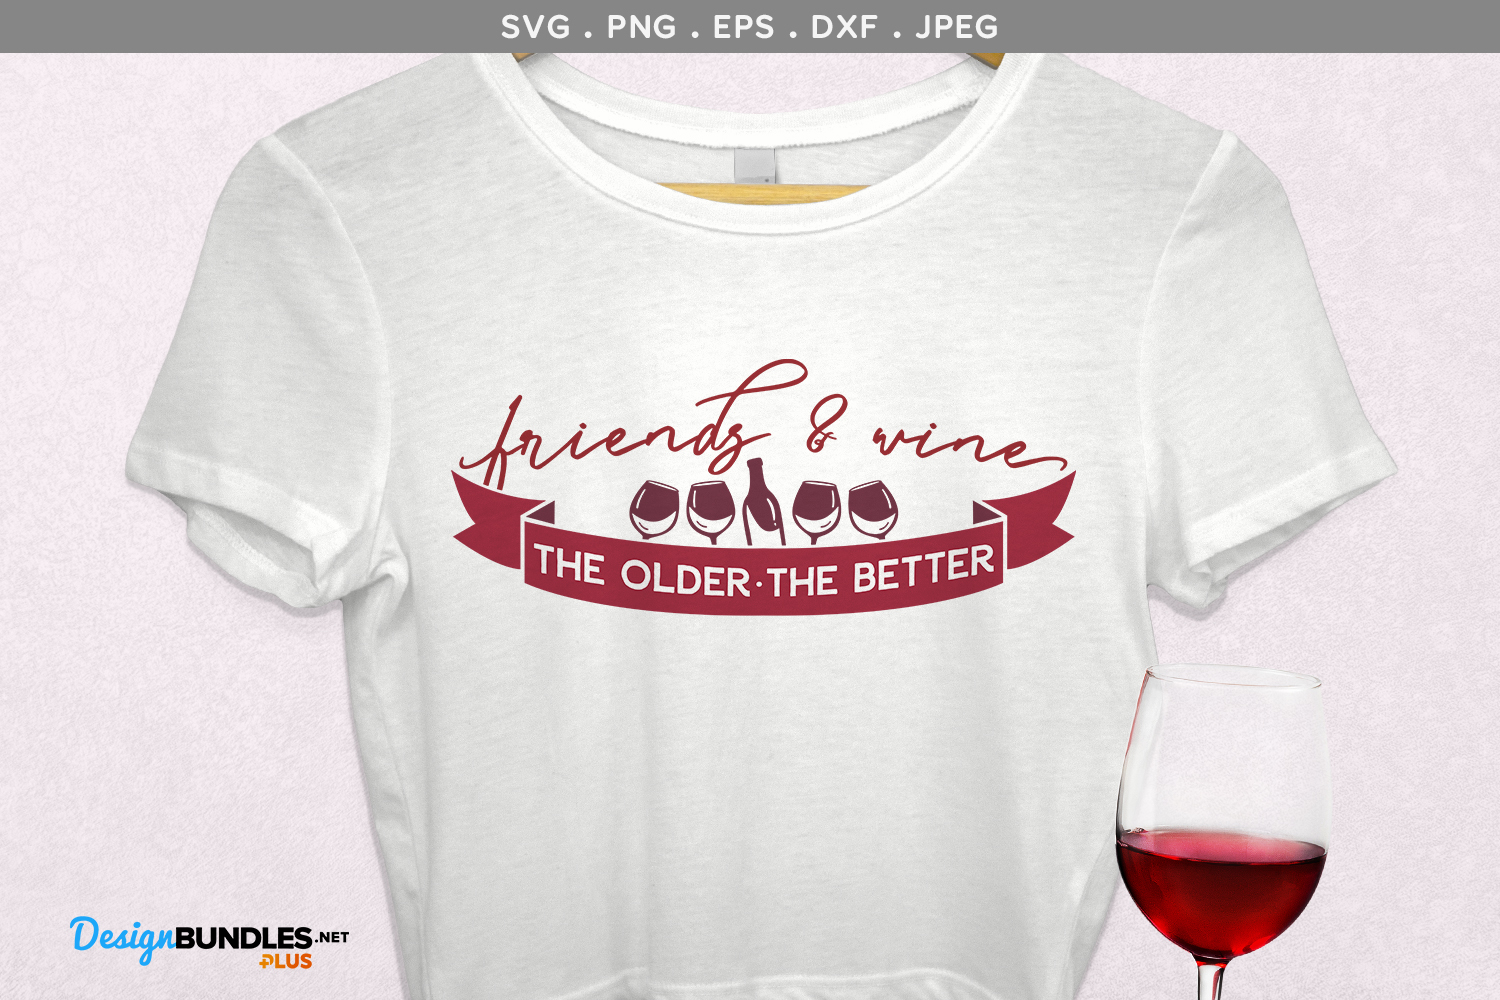 Download Friends & Wine - The Older the Better SVG